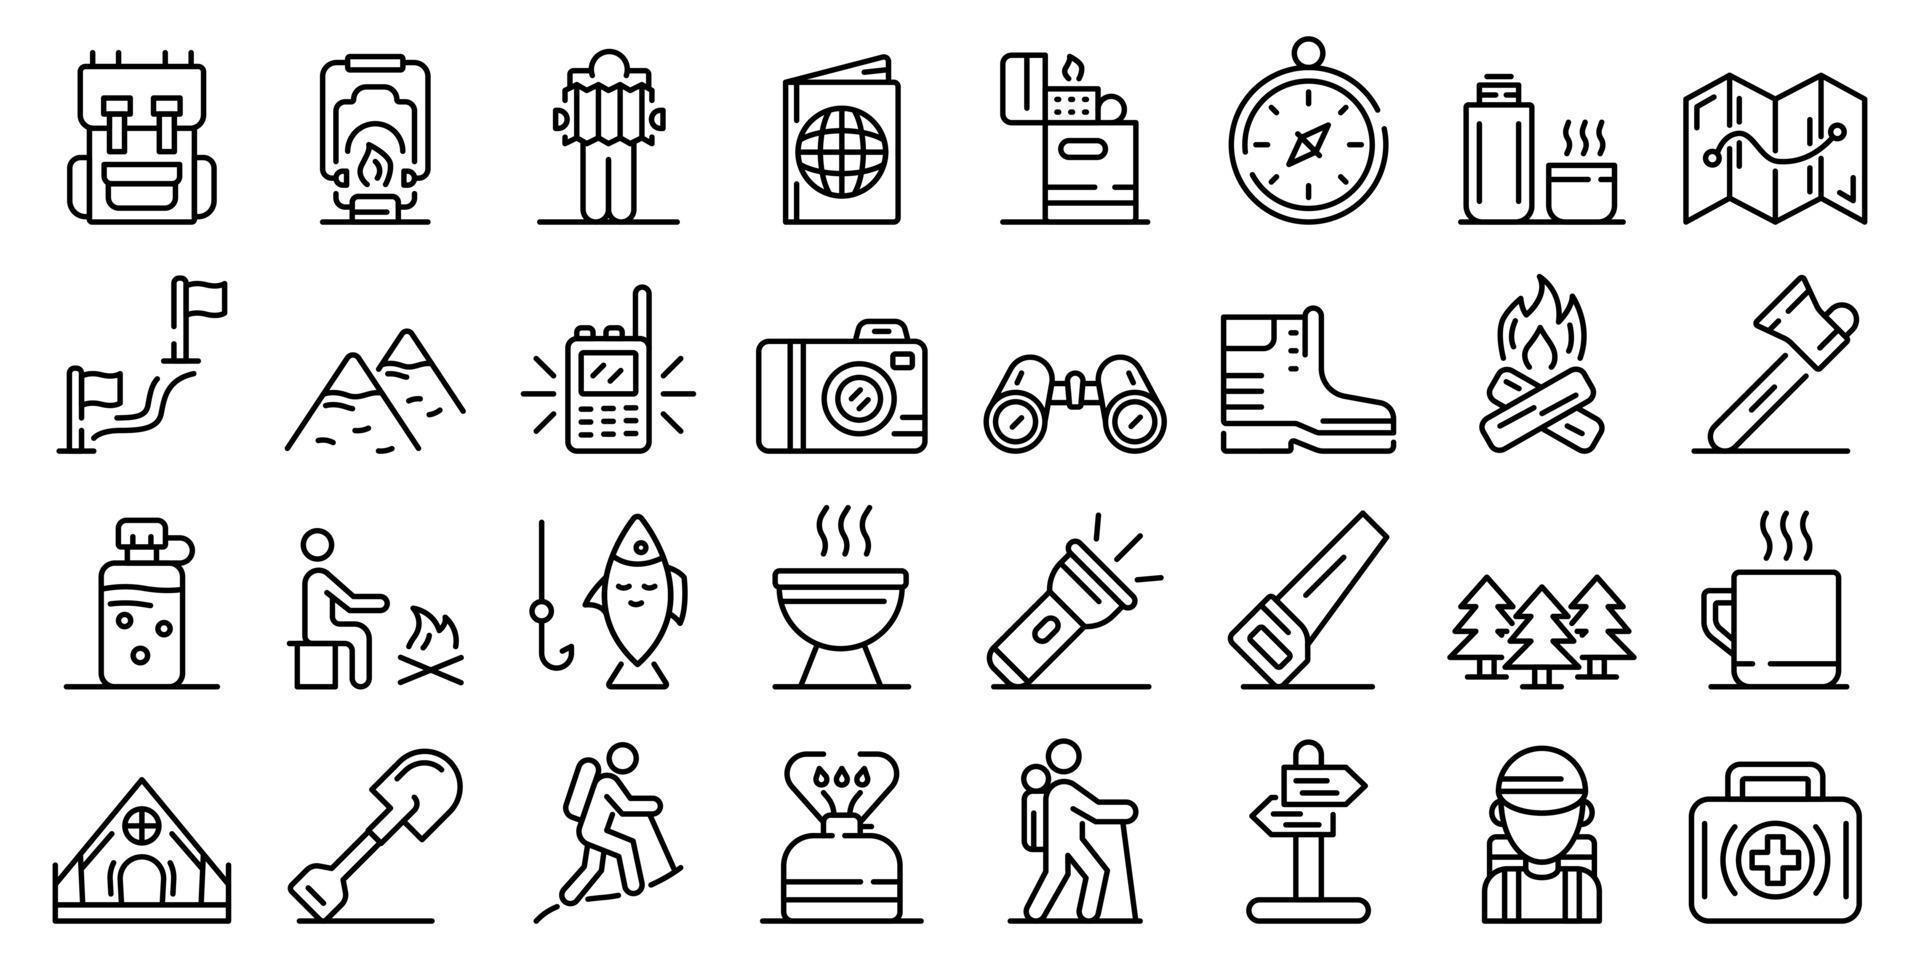 Hiking icons set, outline style vector